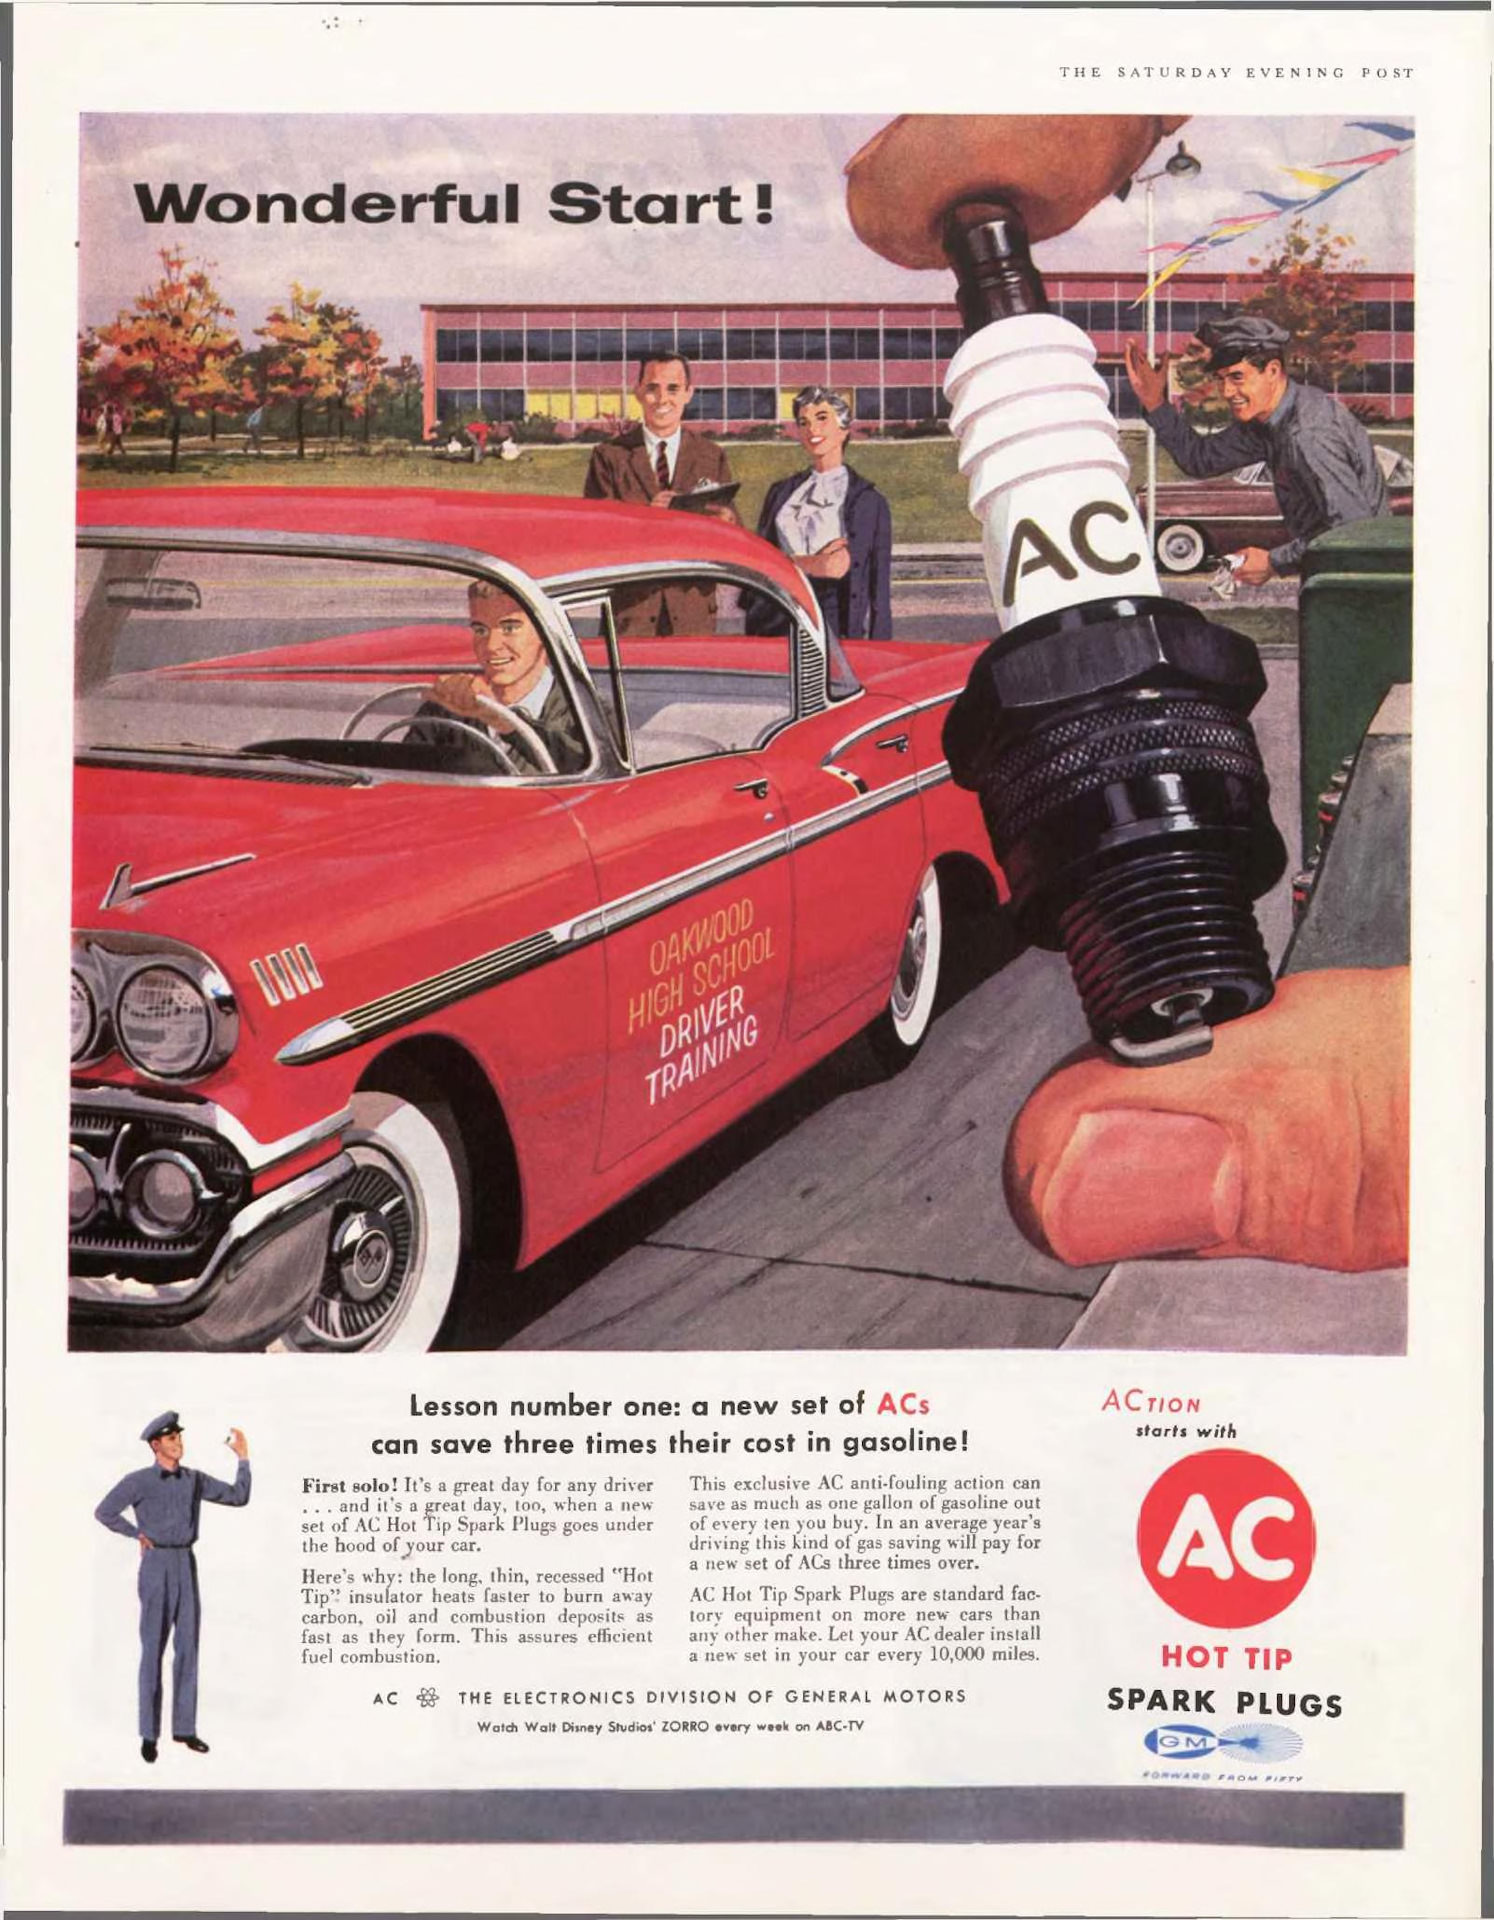 Vintage AC Spark Plugs ads from the 1950s and 1960s